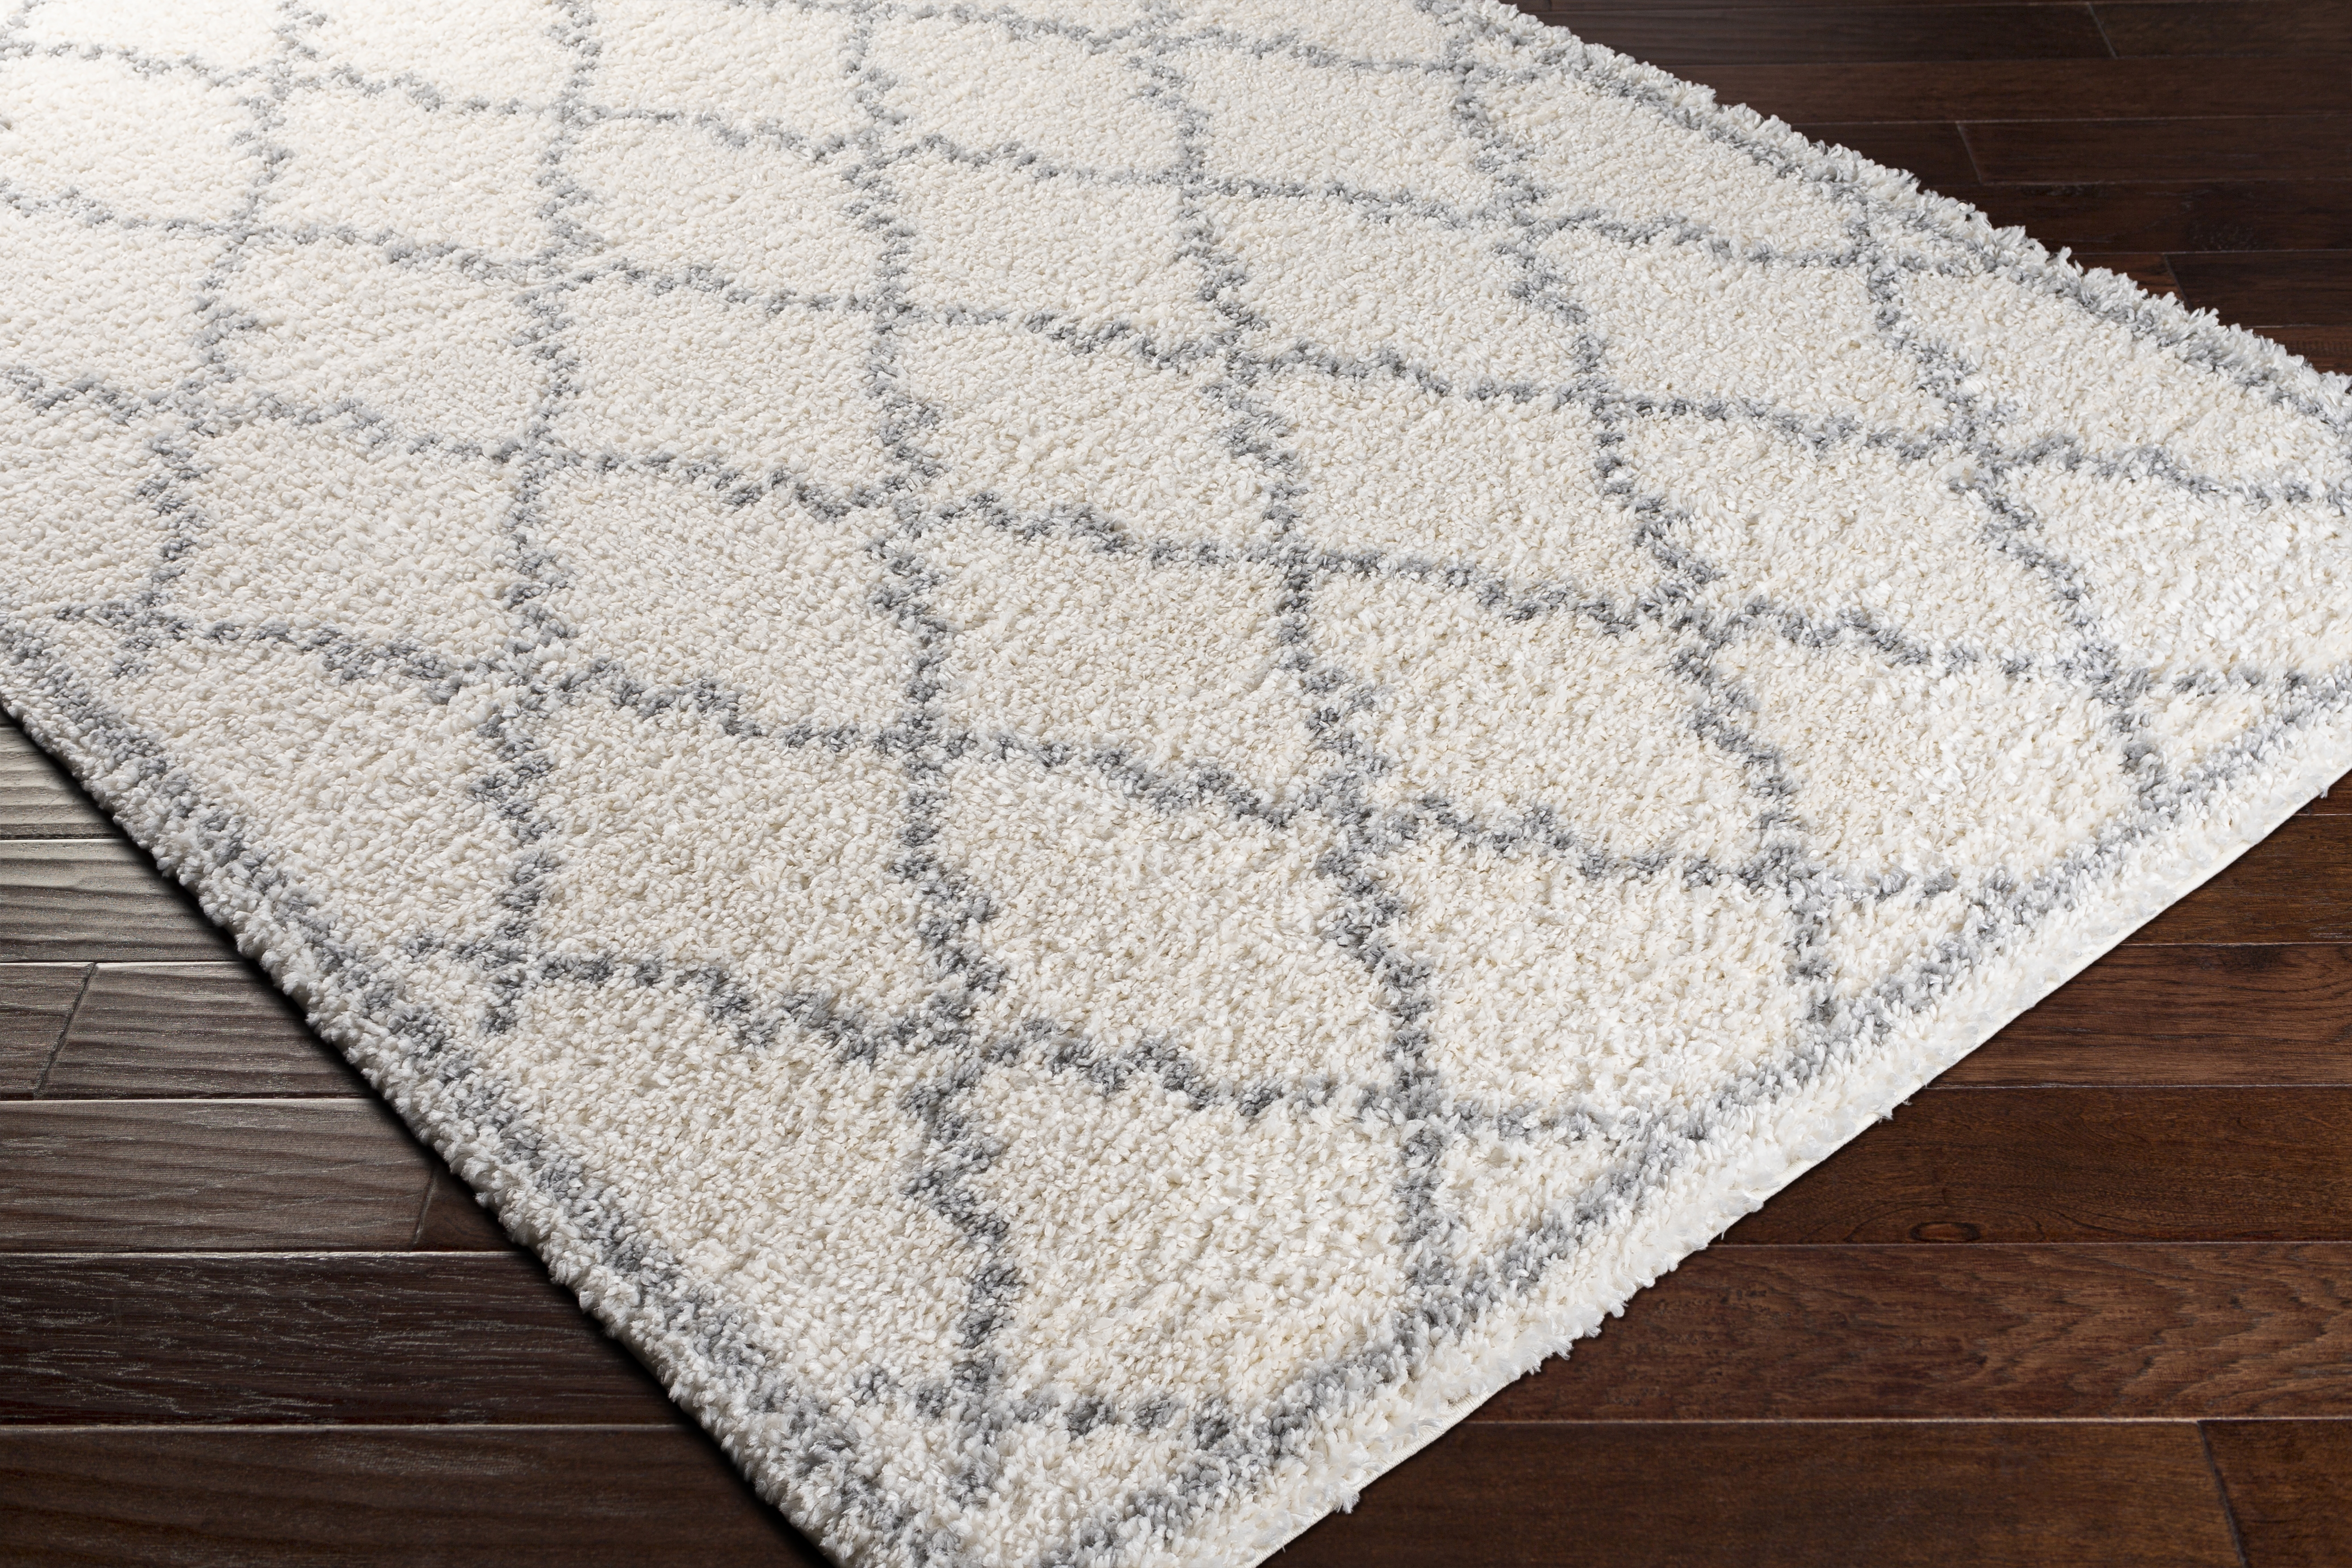 Deluxe Shag Rug, 6'7" x 9' - Image 6